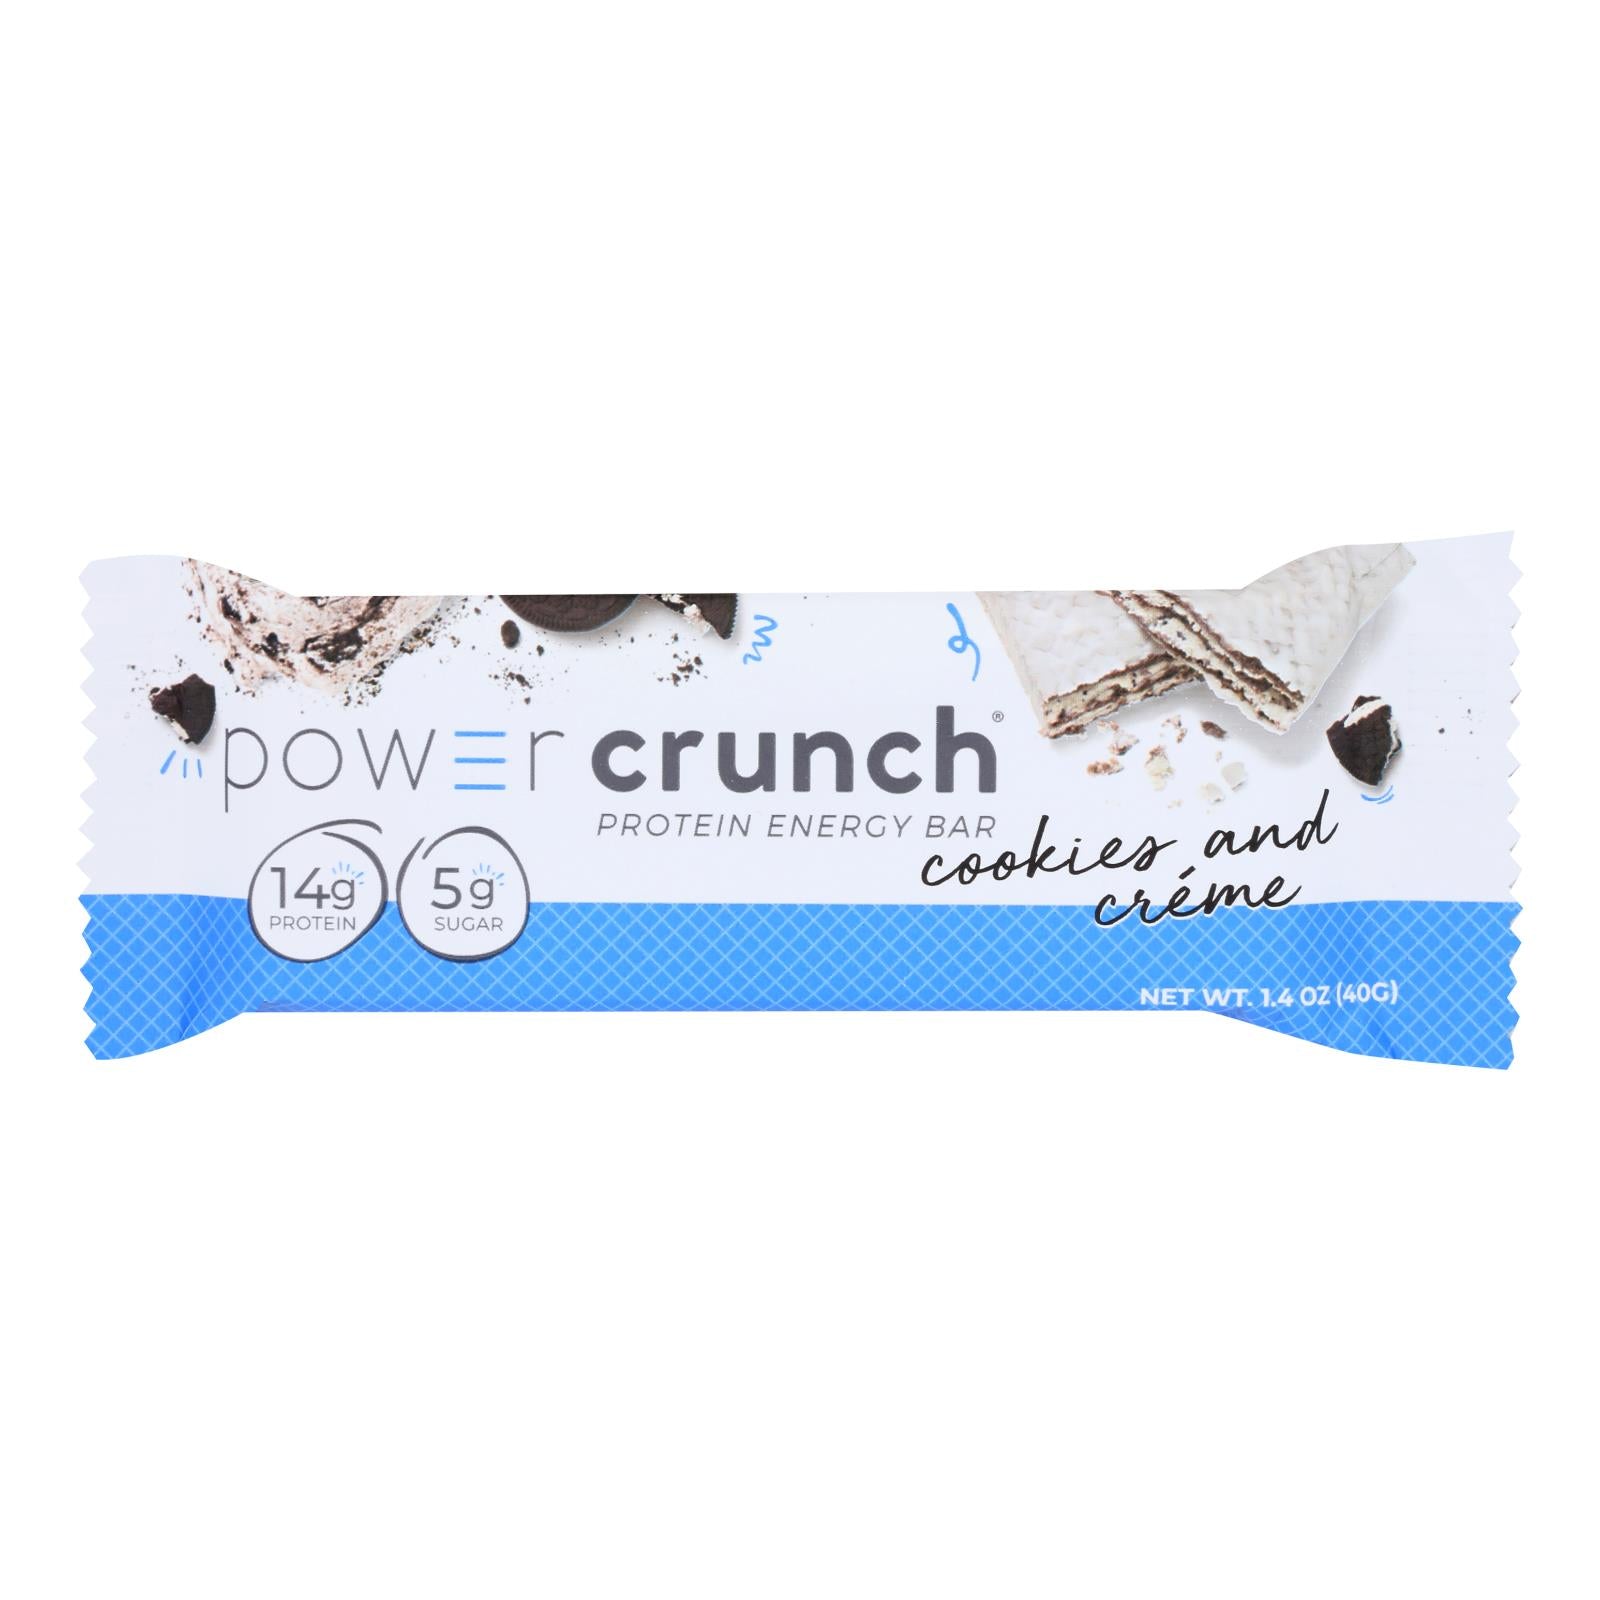 Power Crunch Bar - Cookies And Cream - Case Of 12 - 1.4 Oz